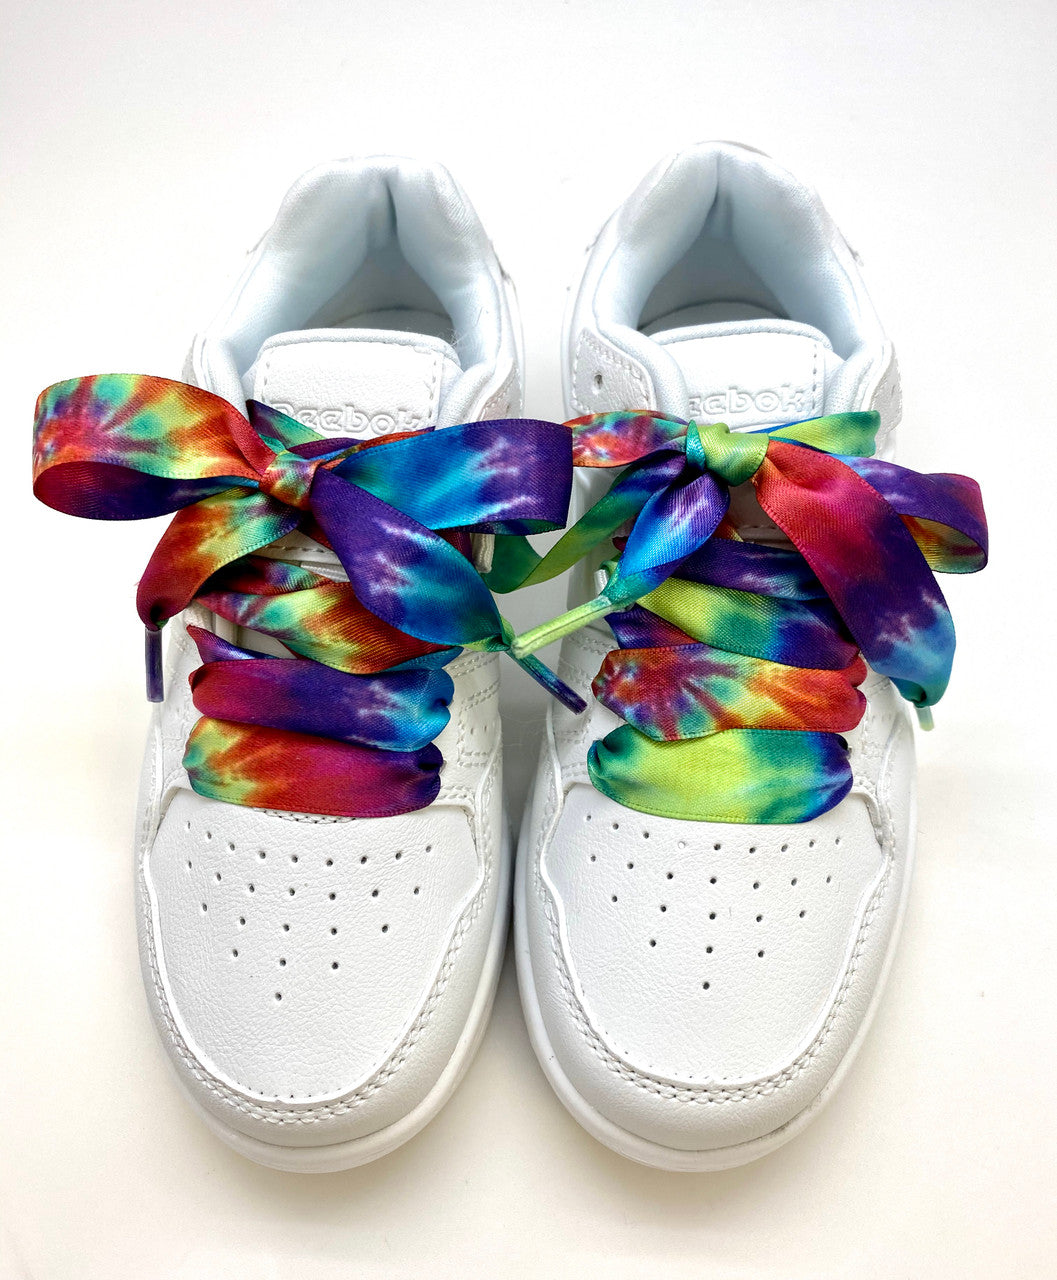 Satin shoelaces tie dye  design is perfect for adding some fun and fashion to your sneakers! This is a great shoelace for fun dance shoes, wedding shoes, cheerleading and recitals! All our ribbon shoelaces are printed using dye sublimation technology and can be washed, ironed and re-used! All our laces are designed and printed in the USA